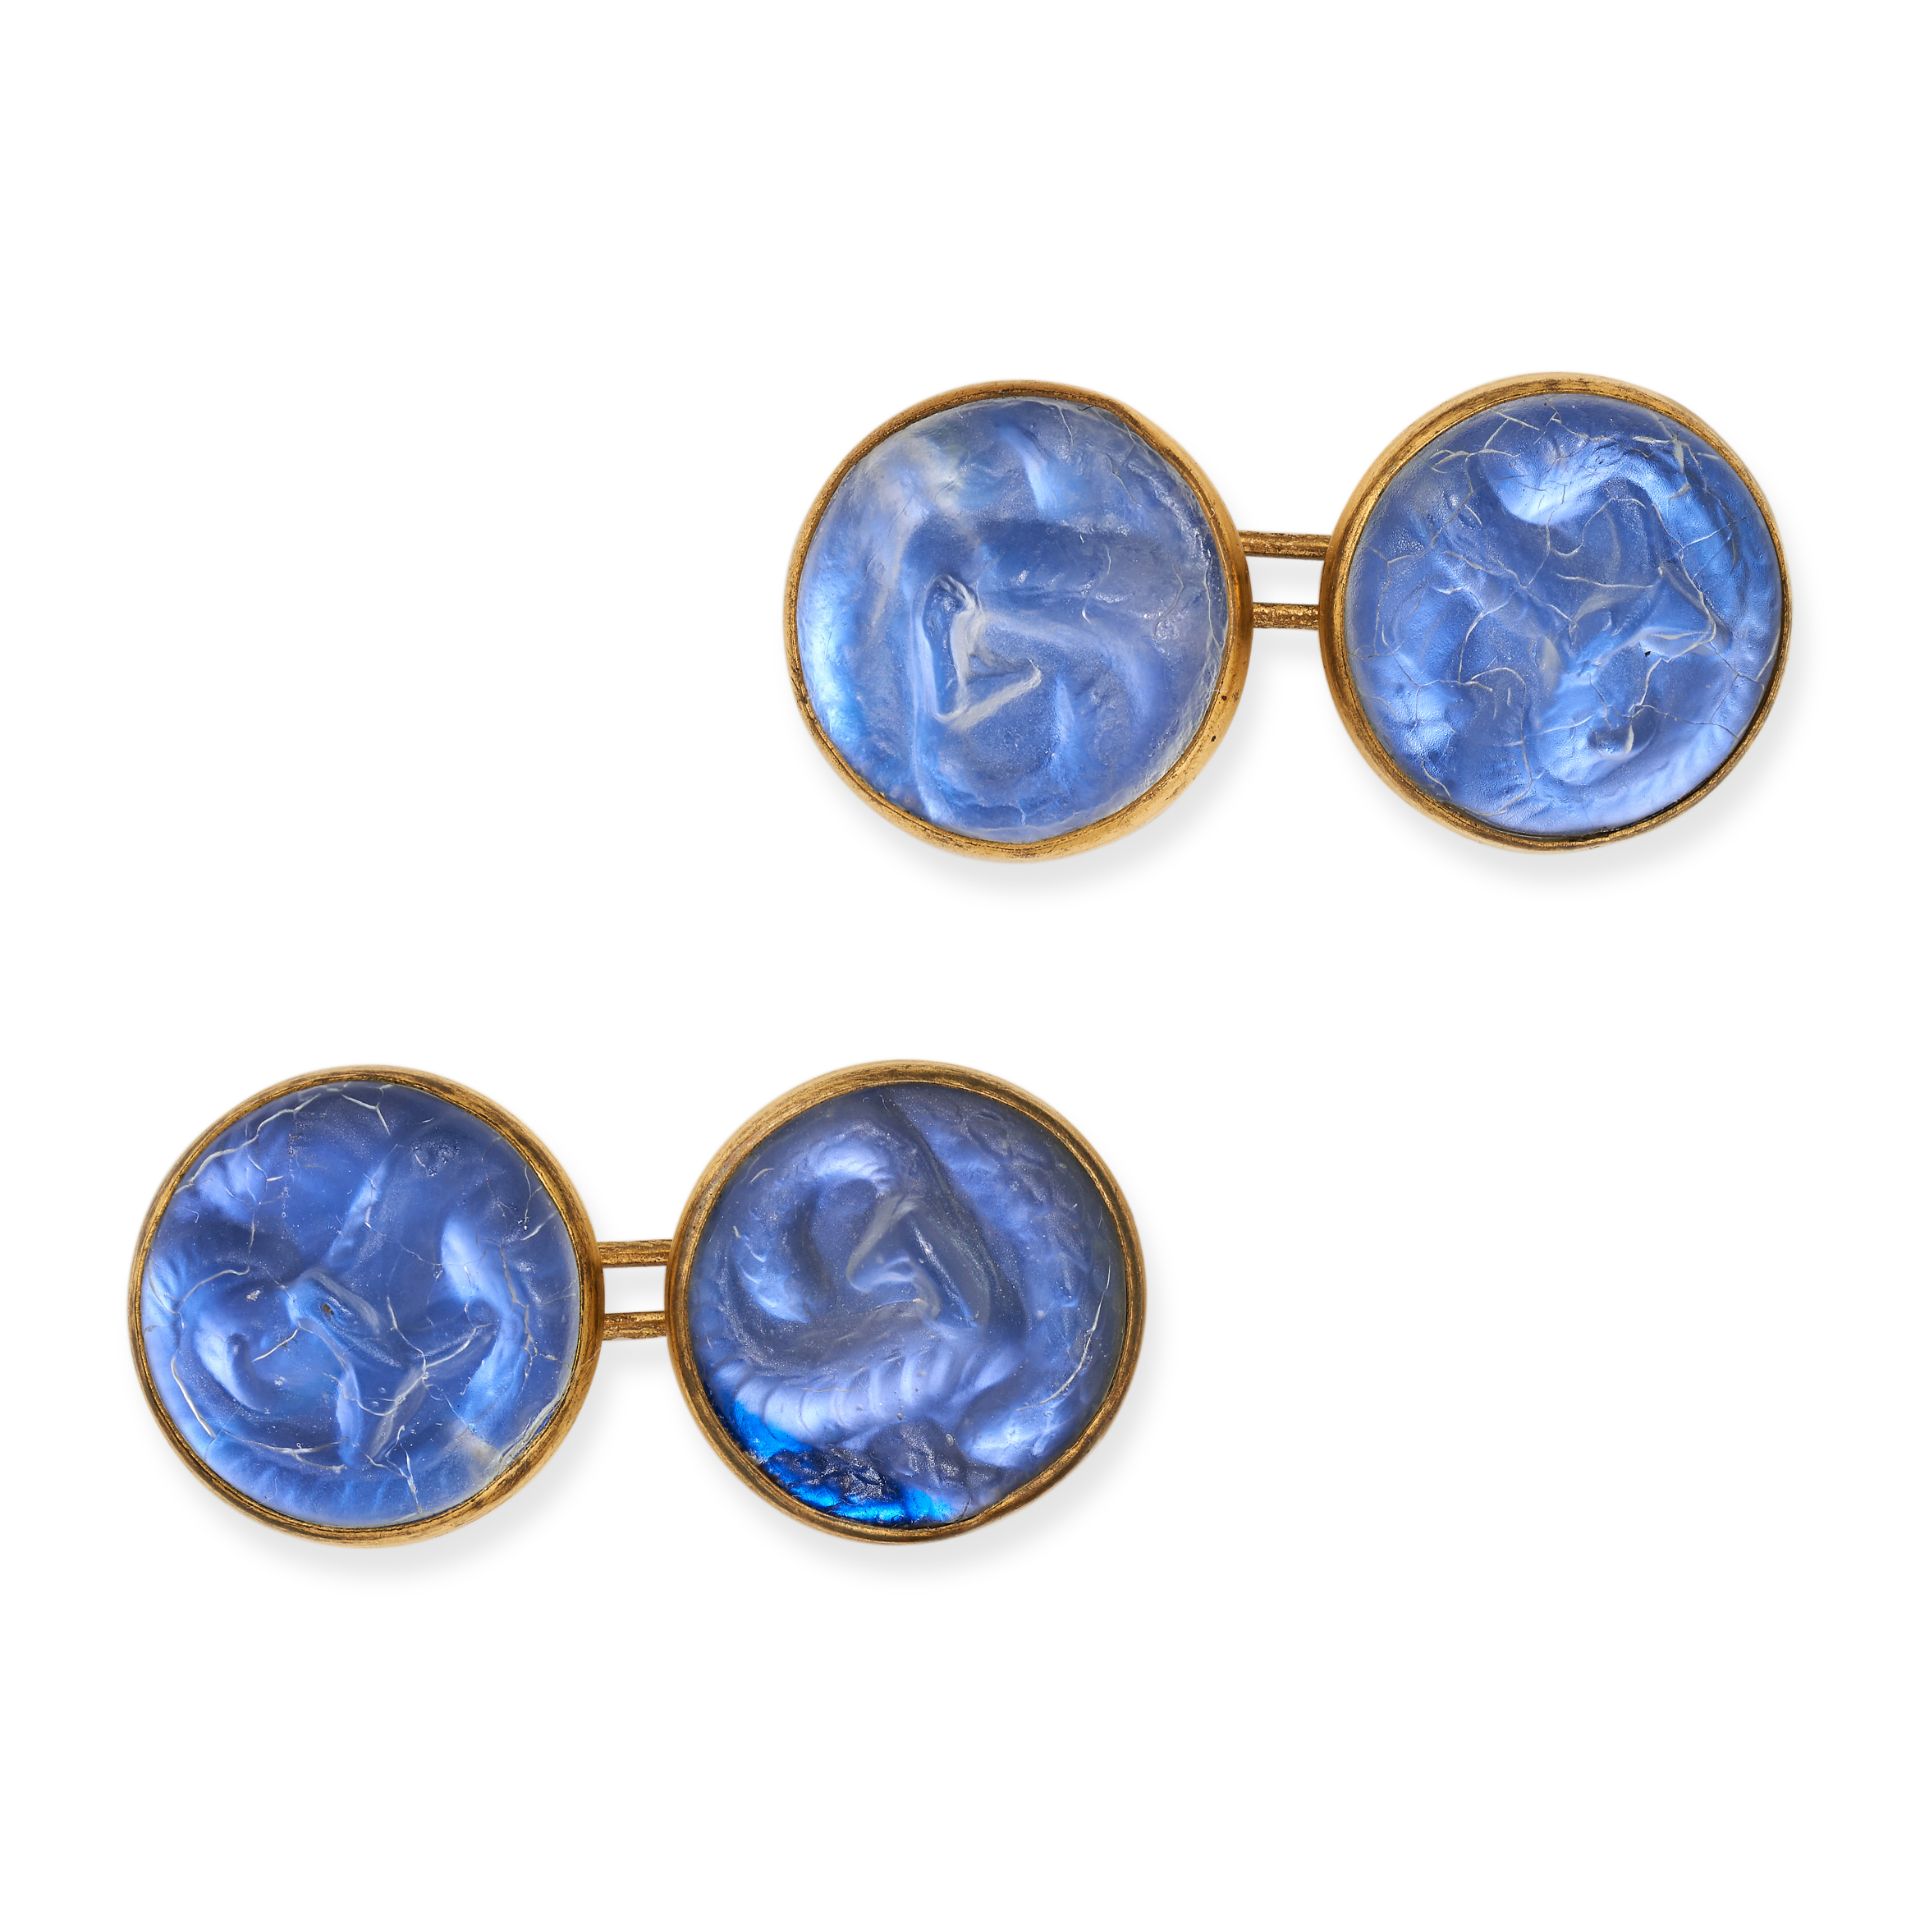 LALIQUE, A PAIR OF GLASS COBRA CUFFLINKS each comprising a circular glass moulded as a coiled cob...